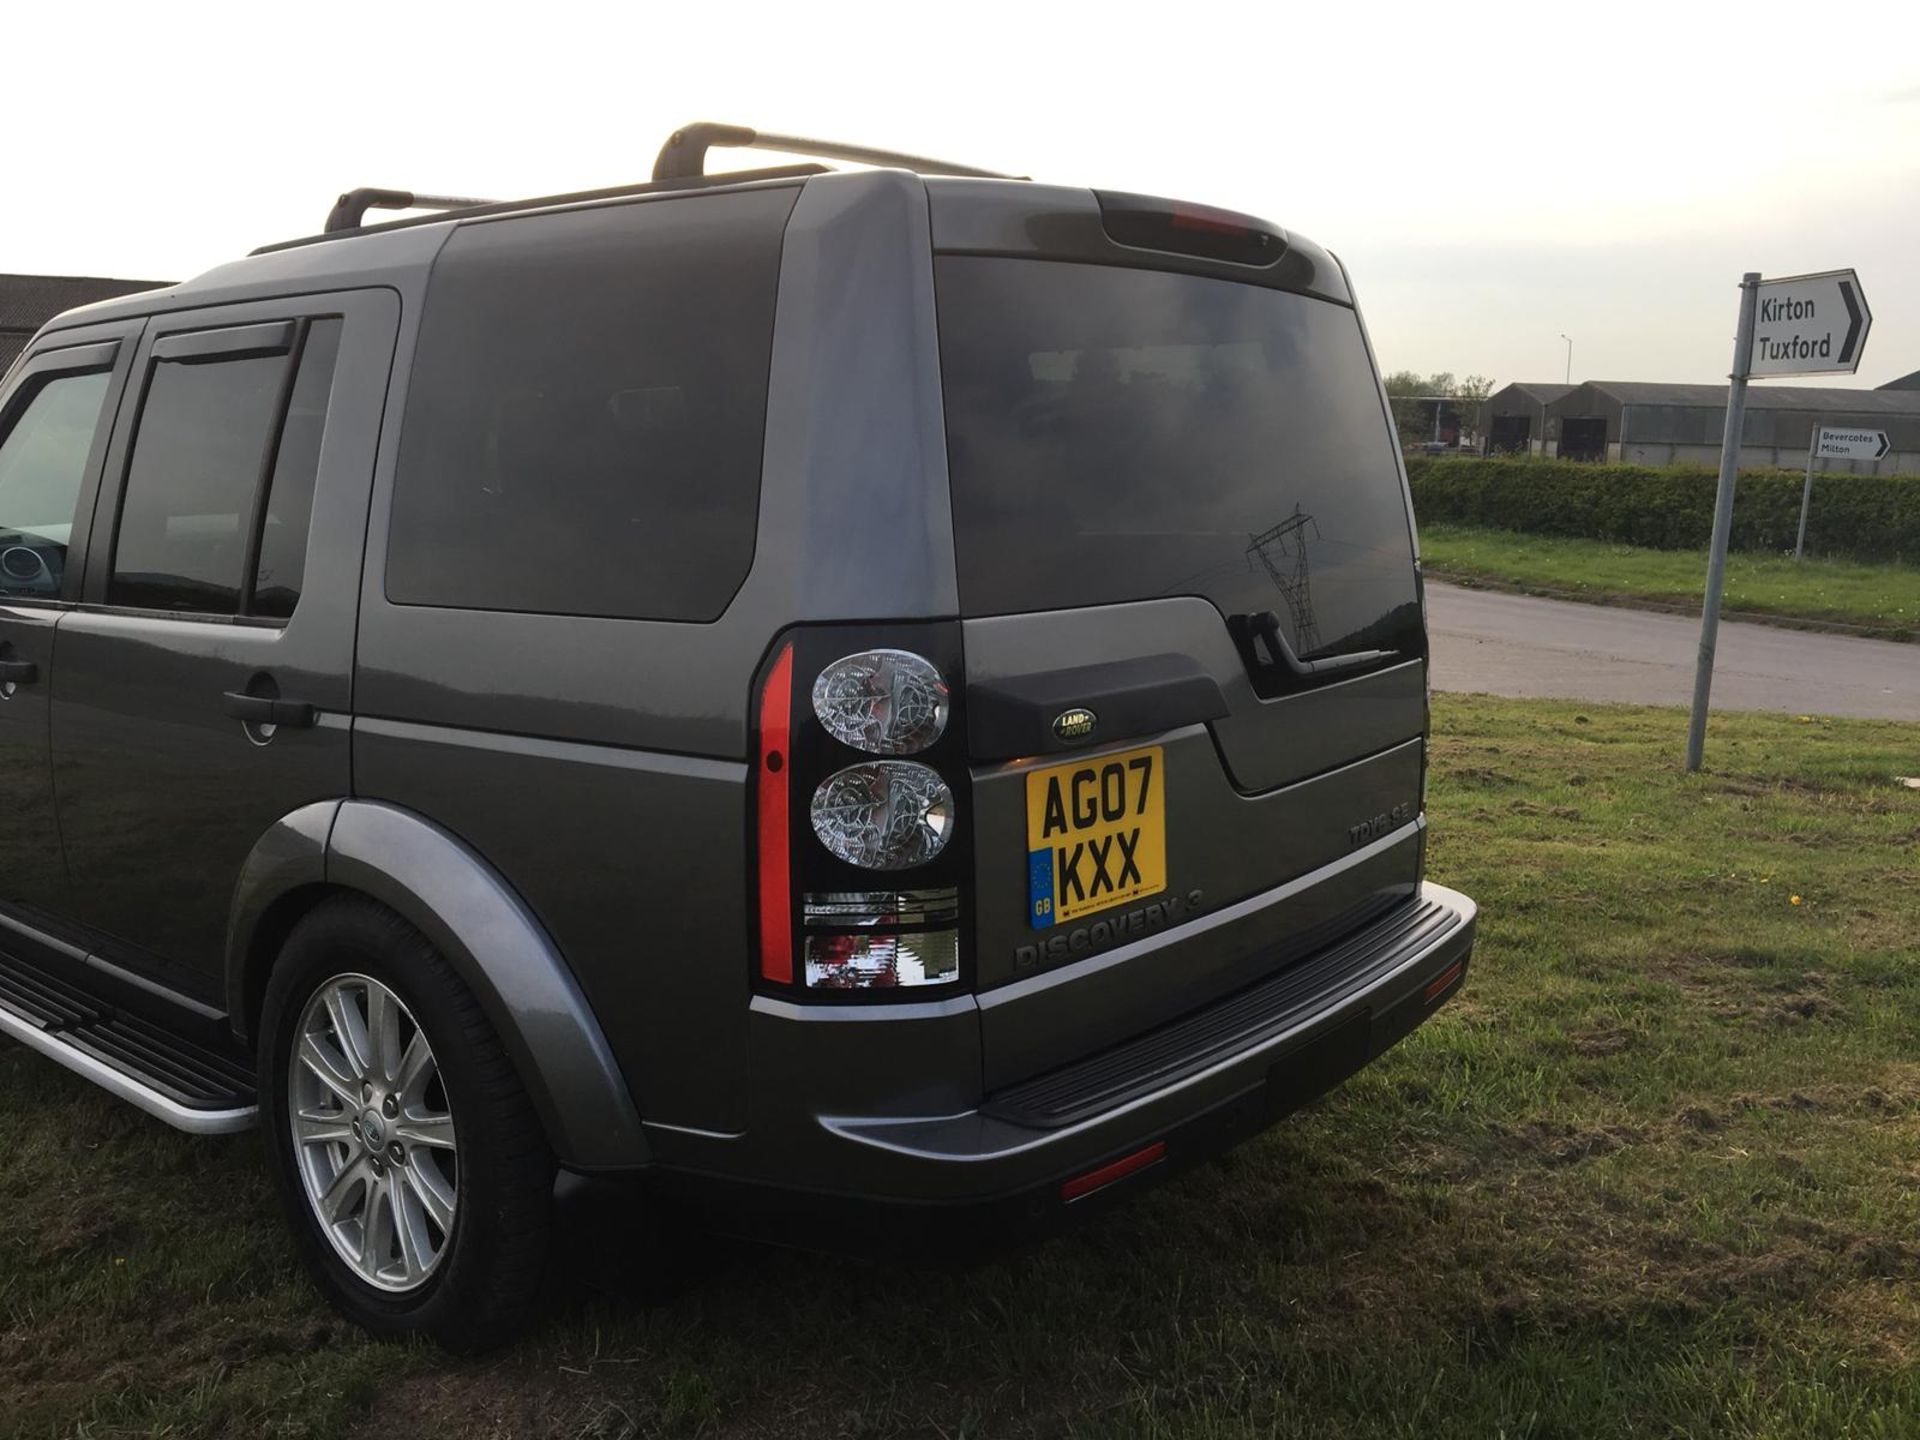 2007/07 REG LAND ROVER DISCOVERY 3 TDV6 SE AUTOMATIC 2.7 DIESEL 4X4, 7 SEATS, FACE-LIFT *NO VAT* - Image 6 of 16